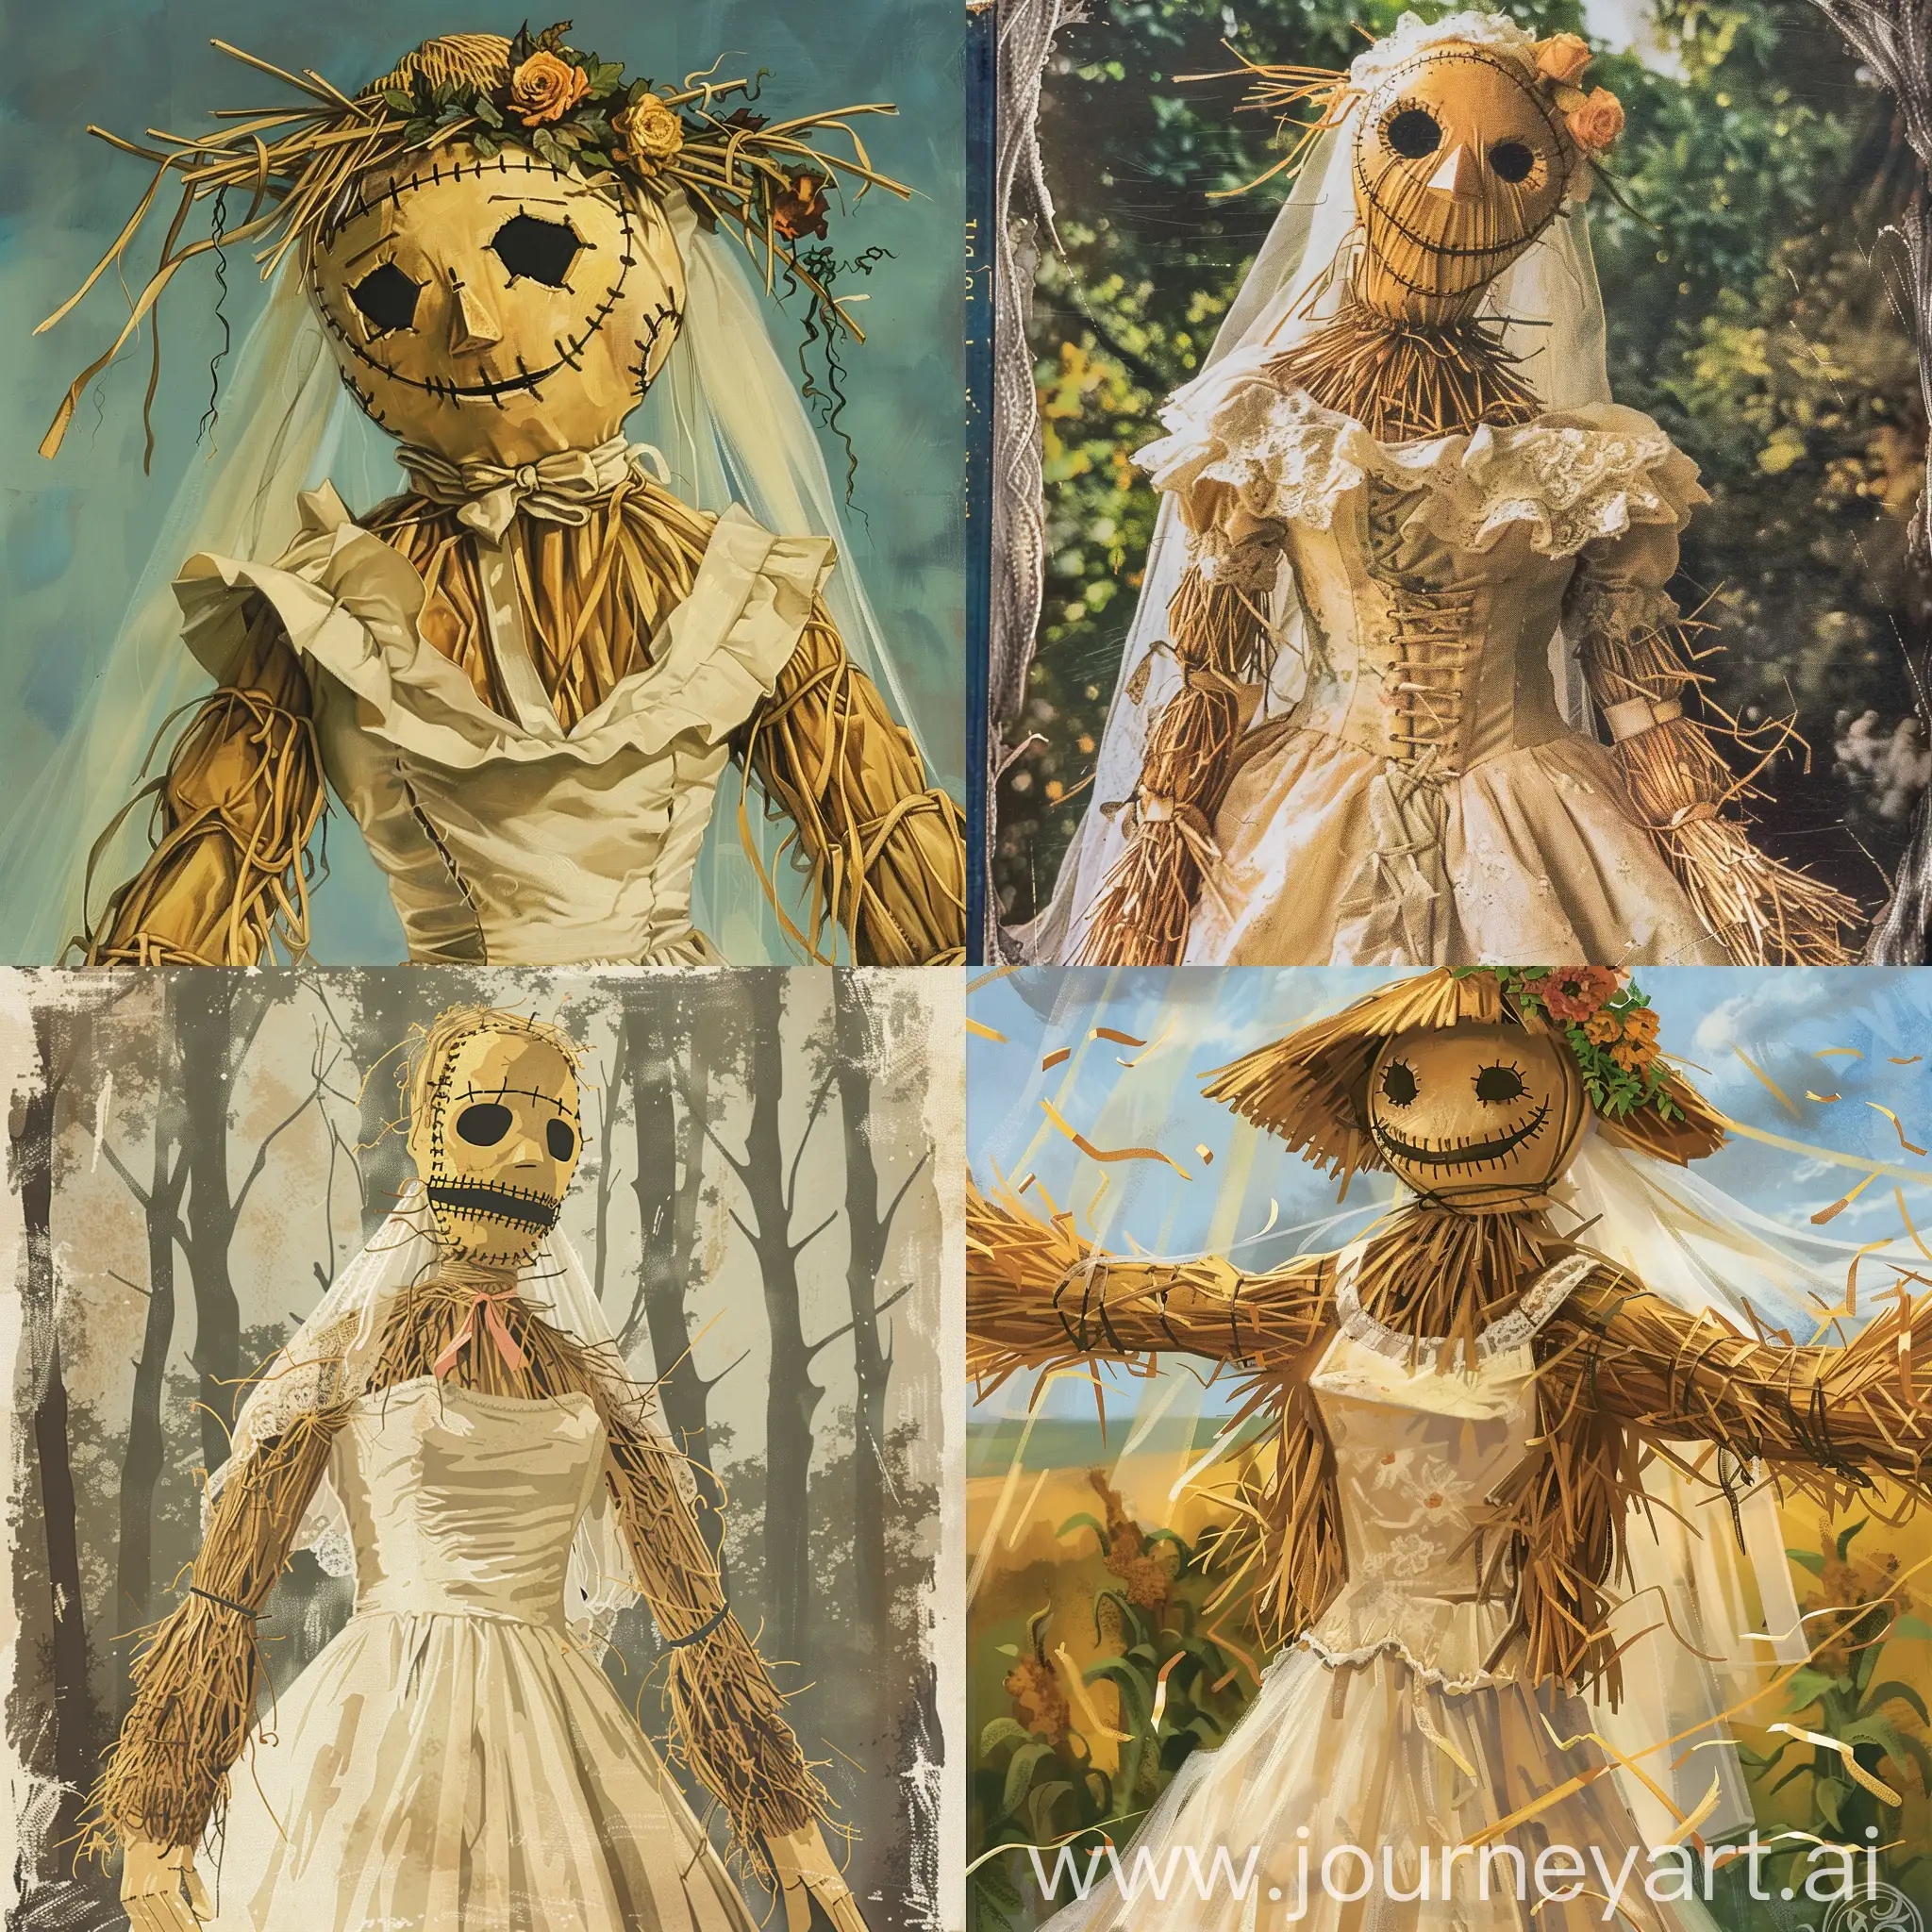 professional poster for a book cover for an story named "the straw bride", a scarecrow dressed in a wedding dress 